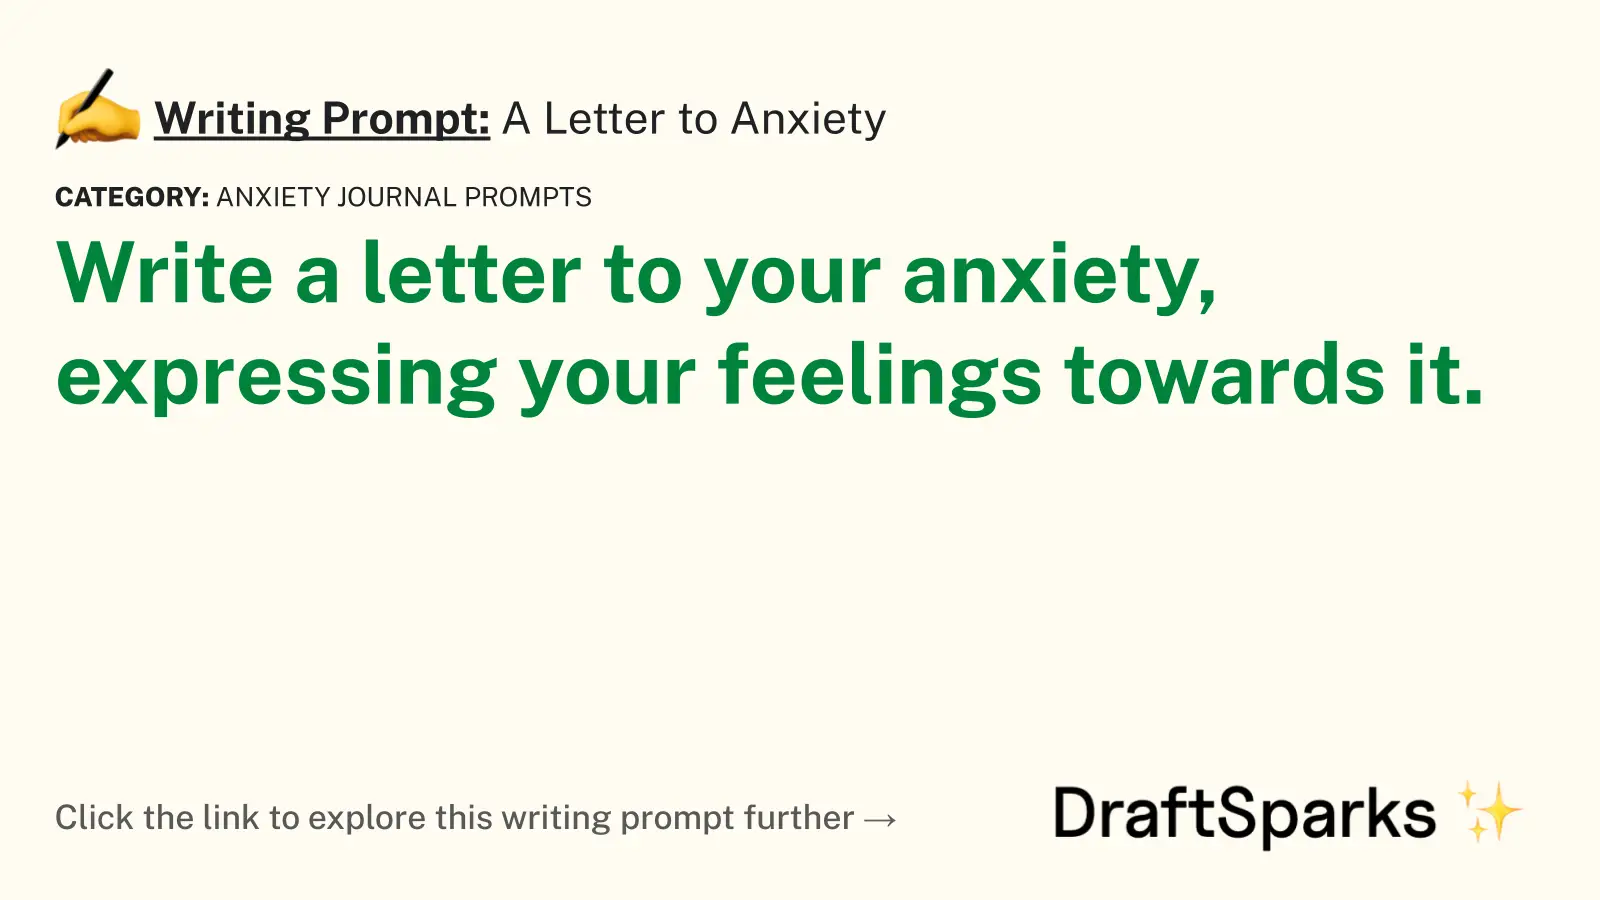 A Letter to Anxiety